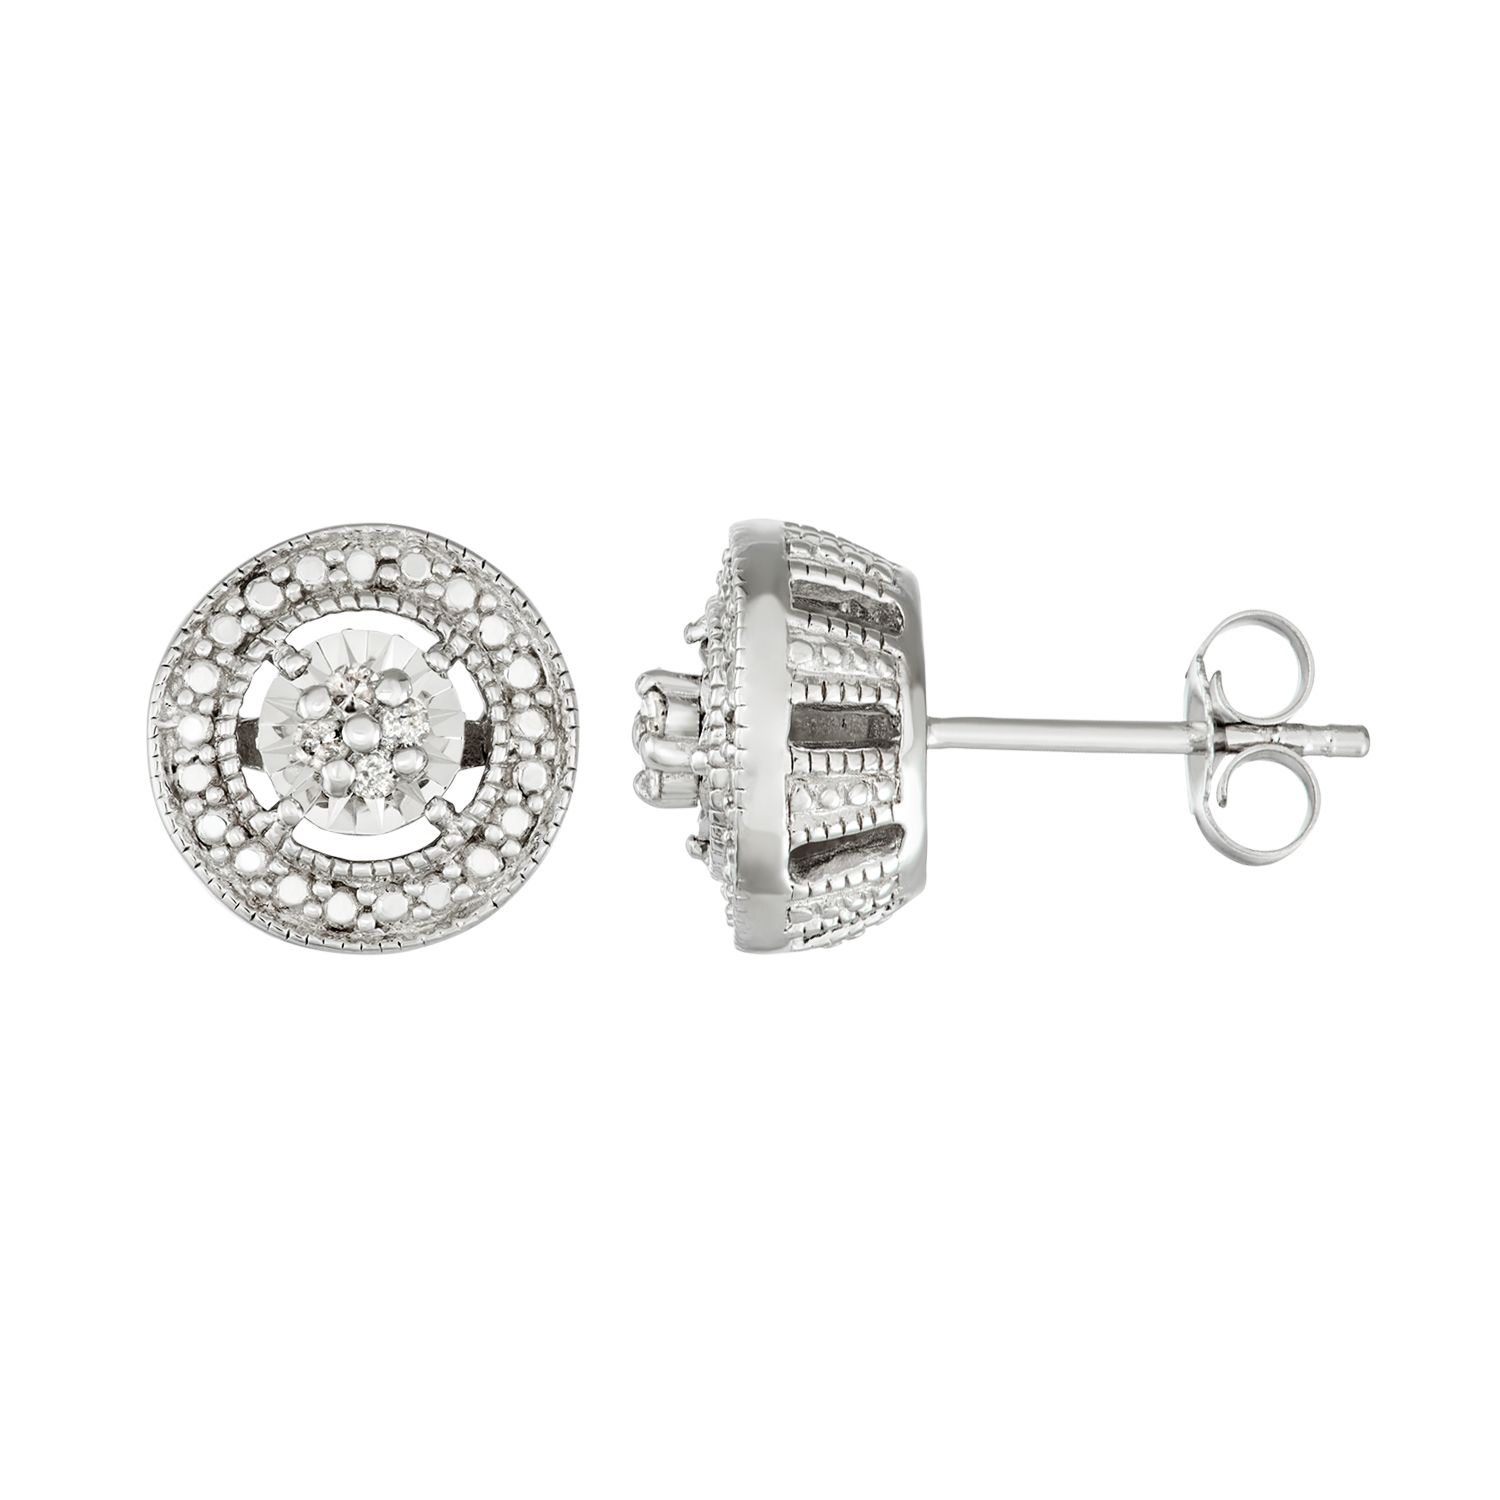 Image for HDI Sterling Silver 1/10 Carat T.W. Diamond Halo Stud Earrings at Kohl's.